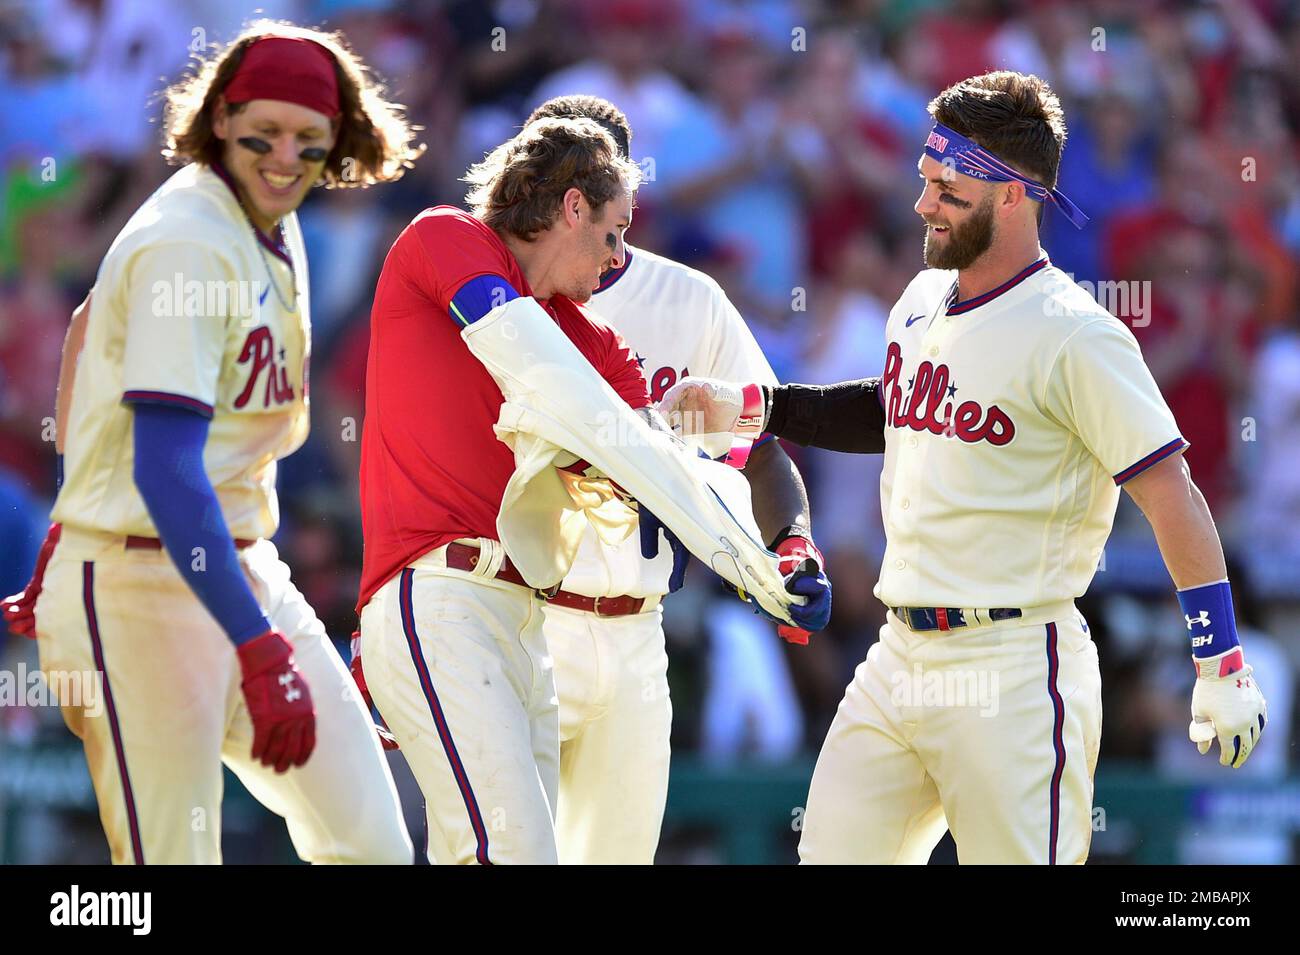 Philadelphia Phillies' Bryson Stott, center, celebrates his walkoff home  run with Bryce Harper, right, Alec Bohm, left, during the ninth inning of a  baseball game against the Los Angeles Angels, Sunday, June